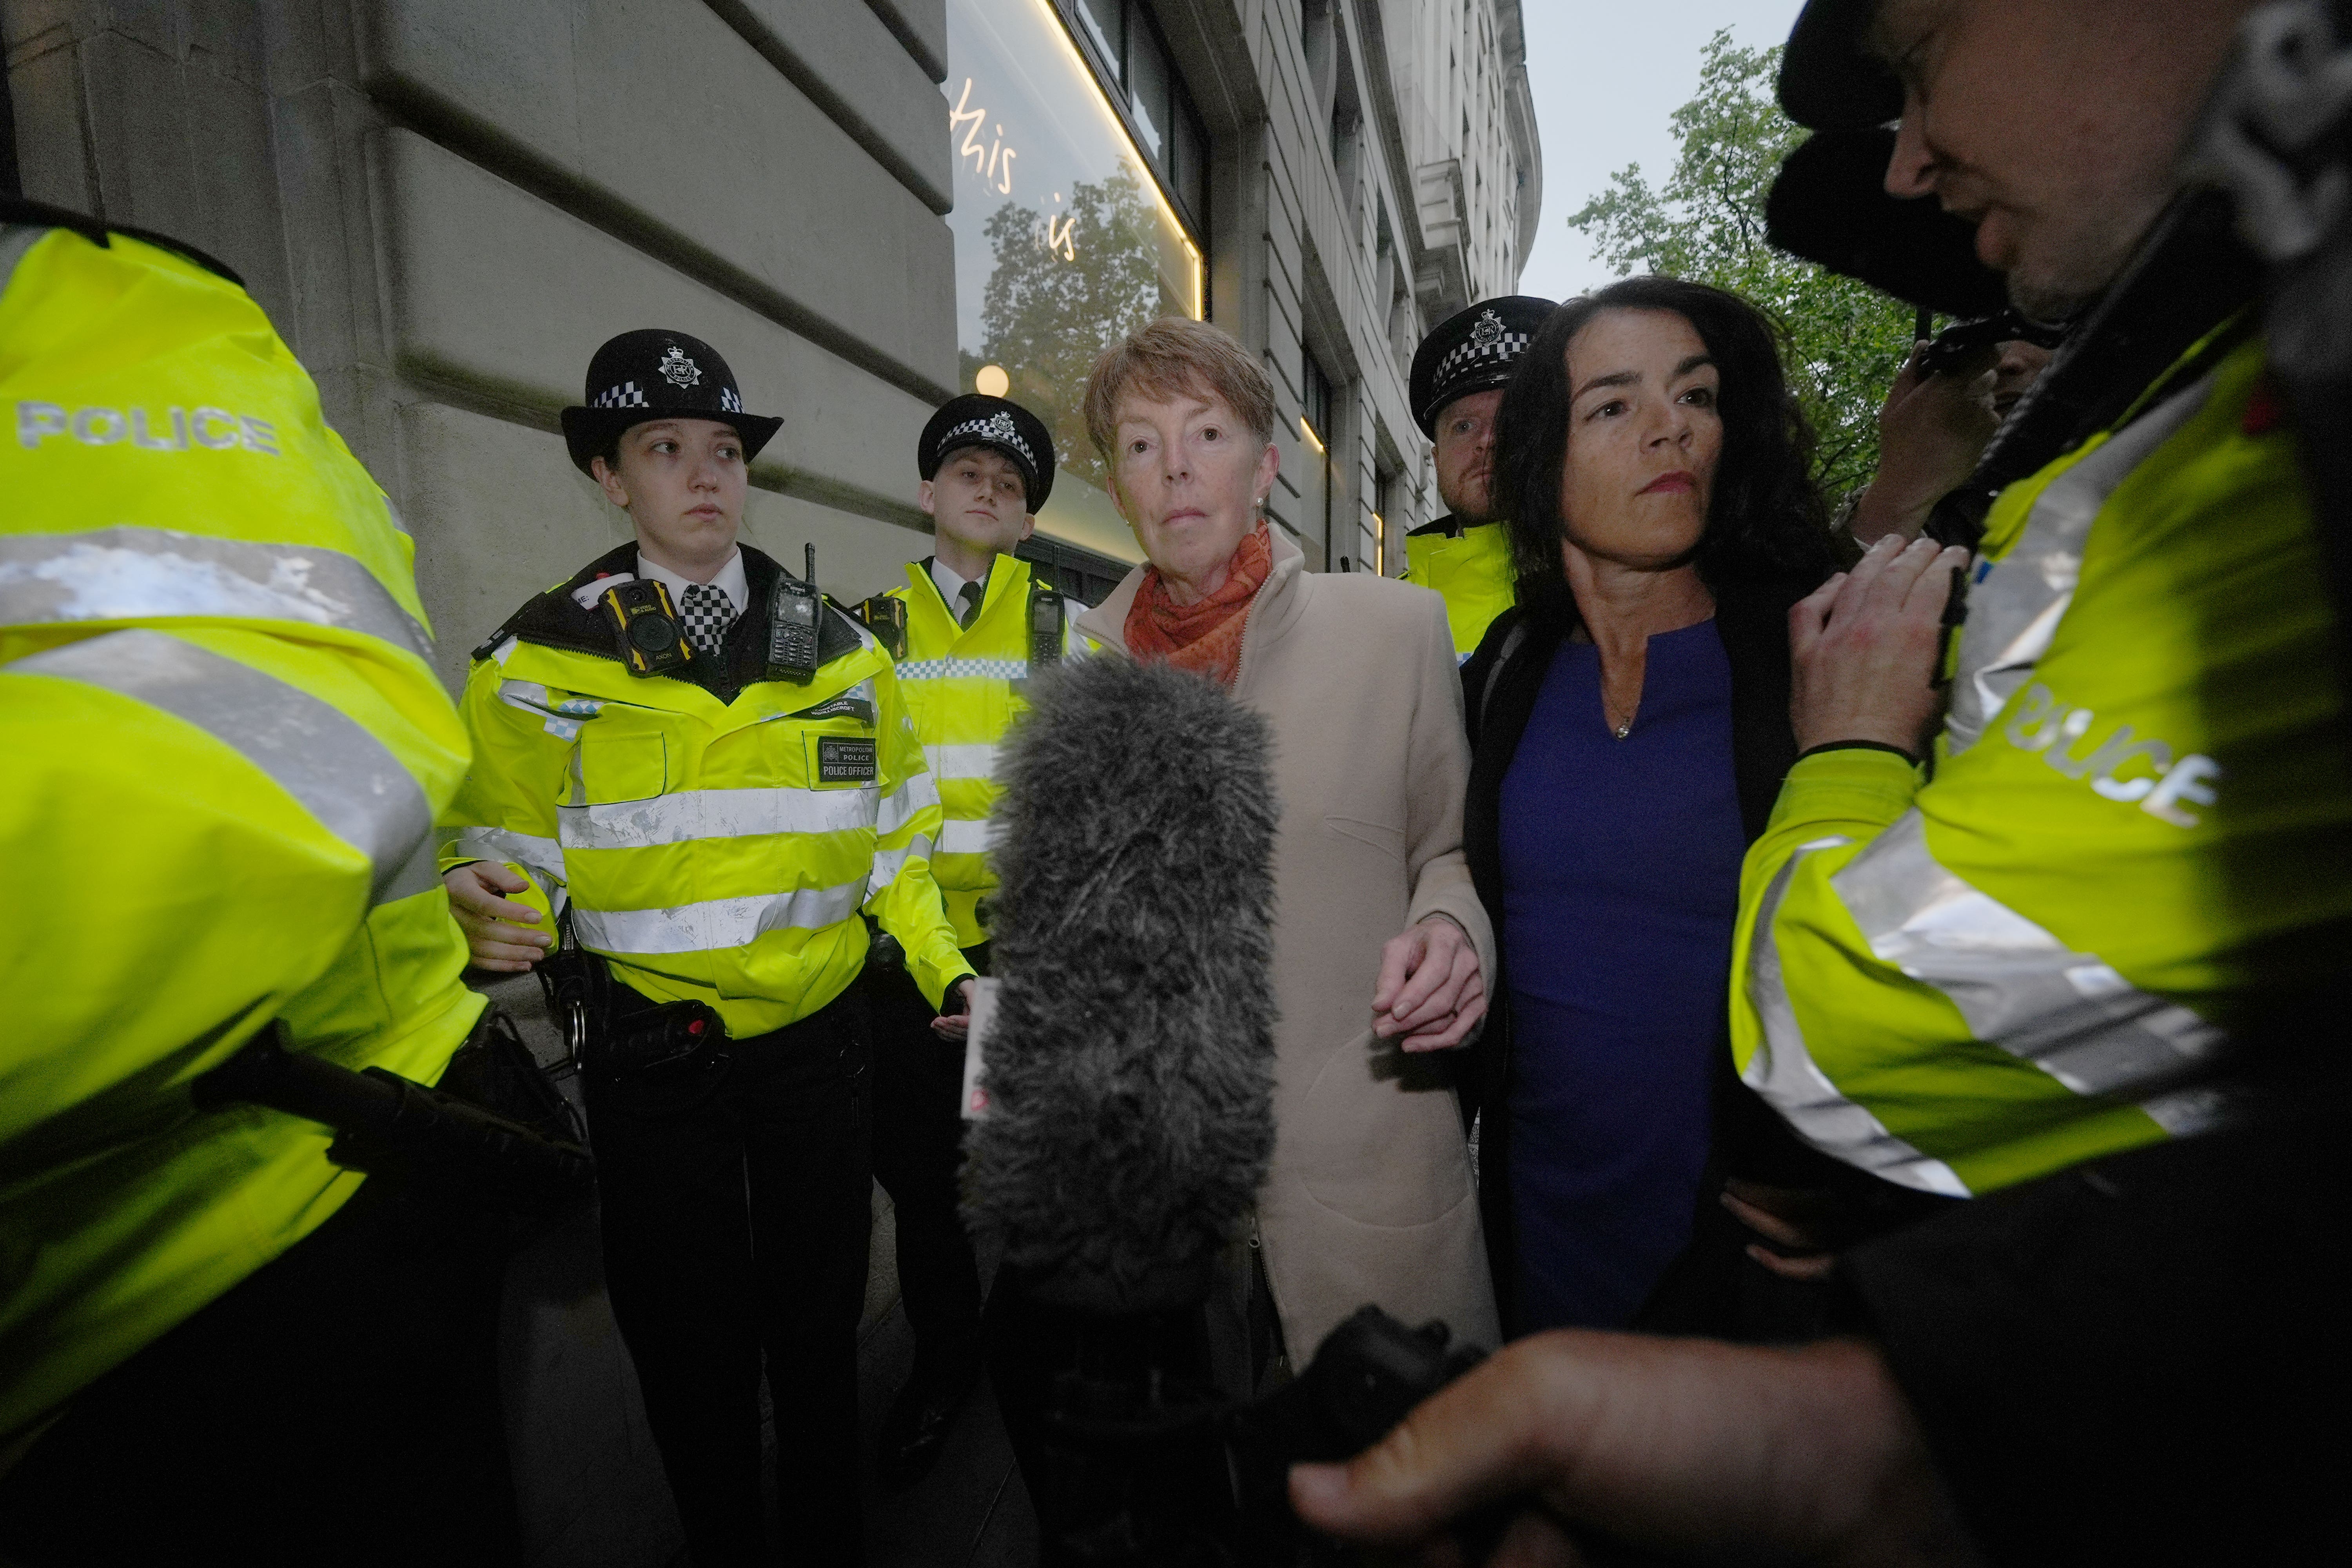 Vennells was surrounded by police and press as she arrived at the inquiry